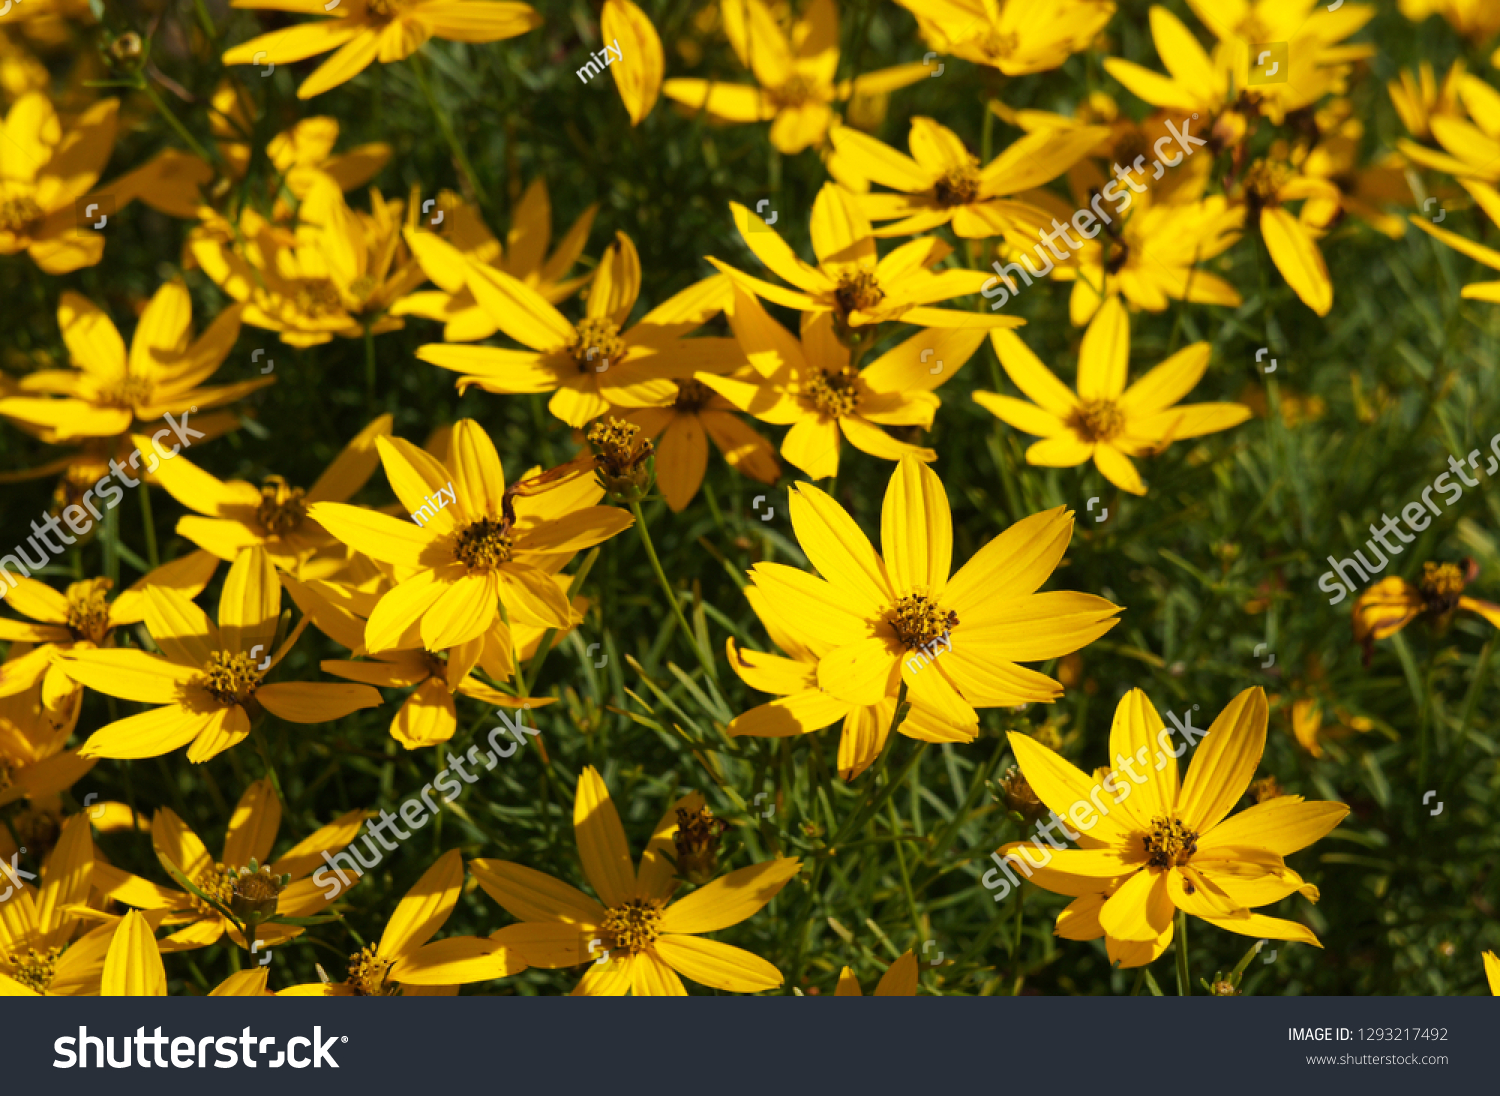 Zagreb Coreopsis Images Stock Photos Vectors Shutterstock